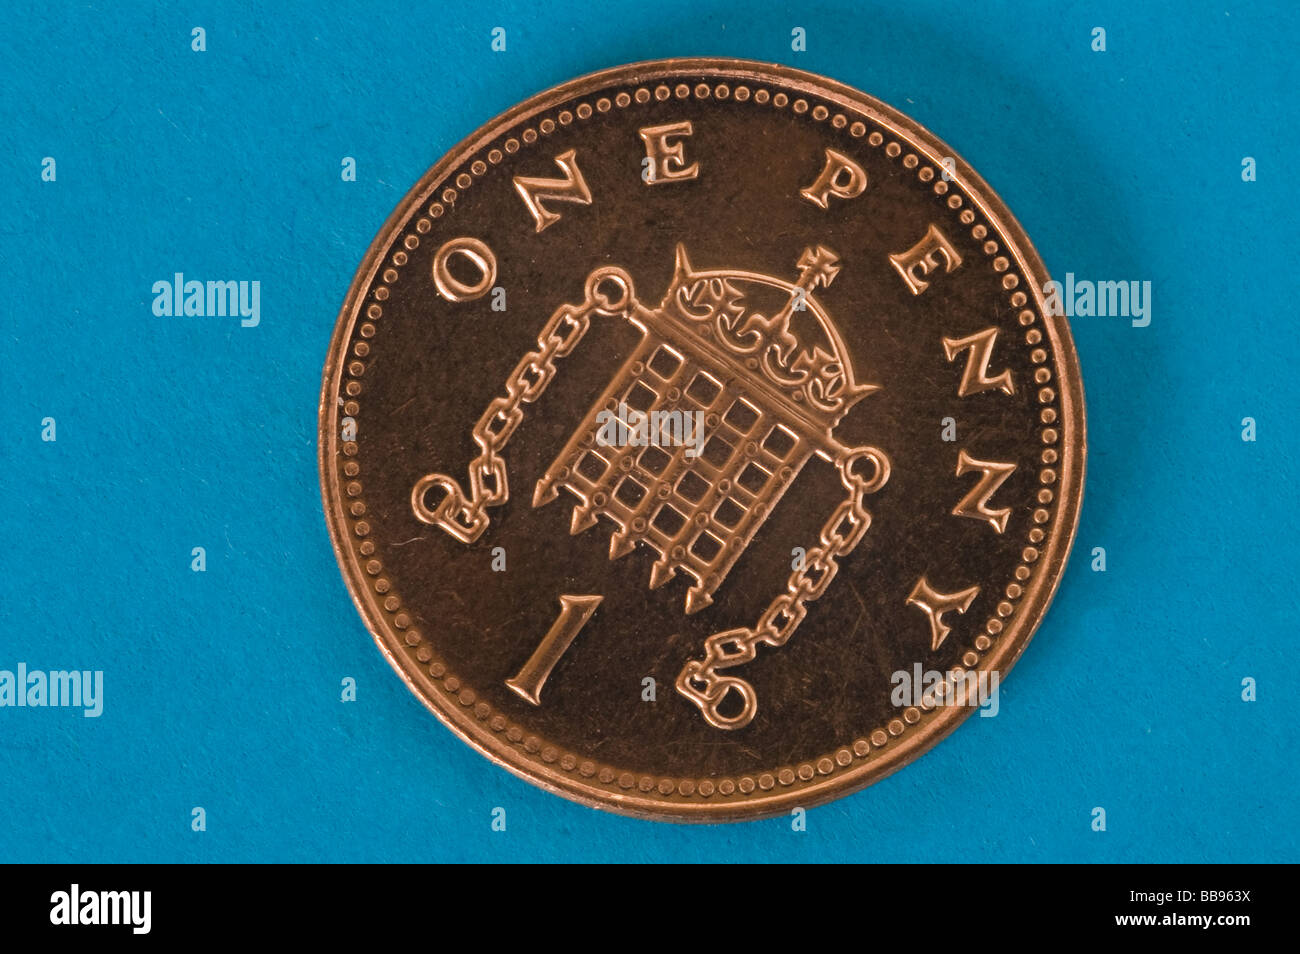 One shiny new one penny coin against a blue background Stock Photo